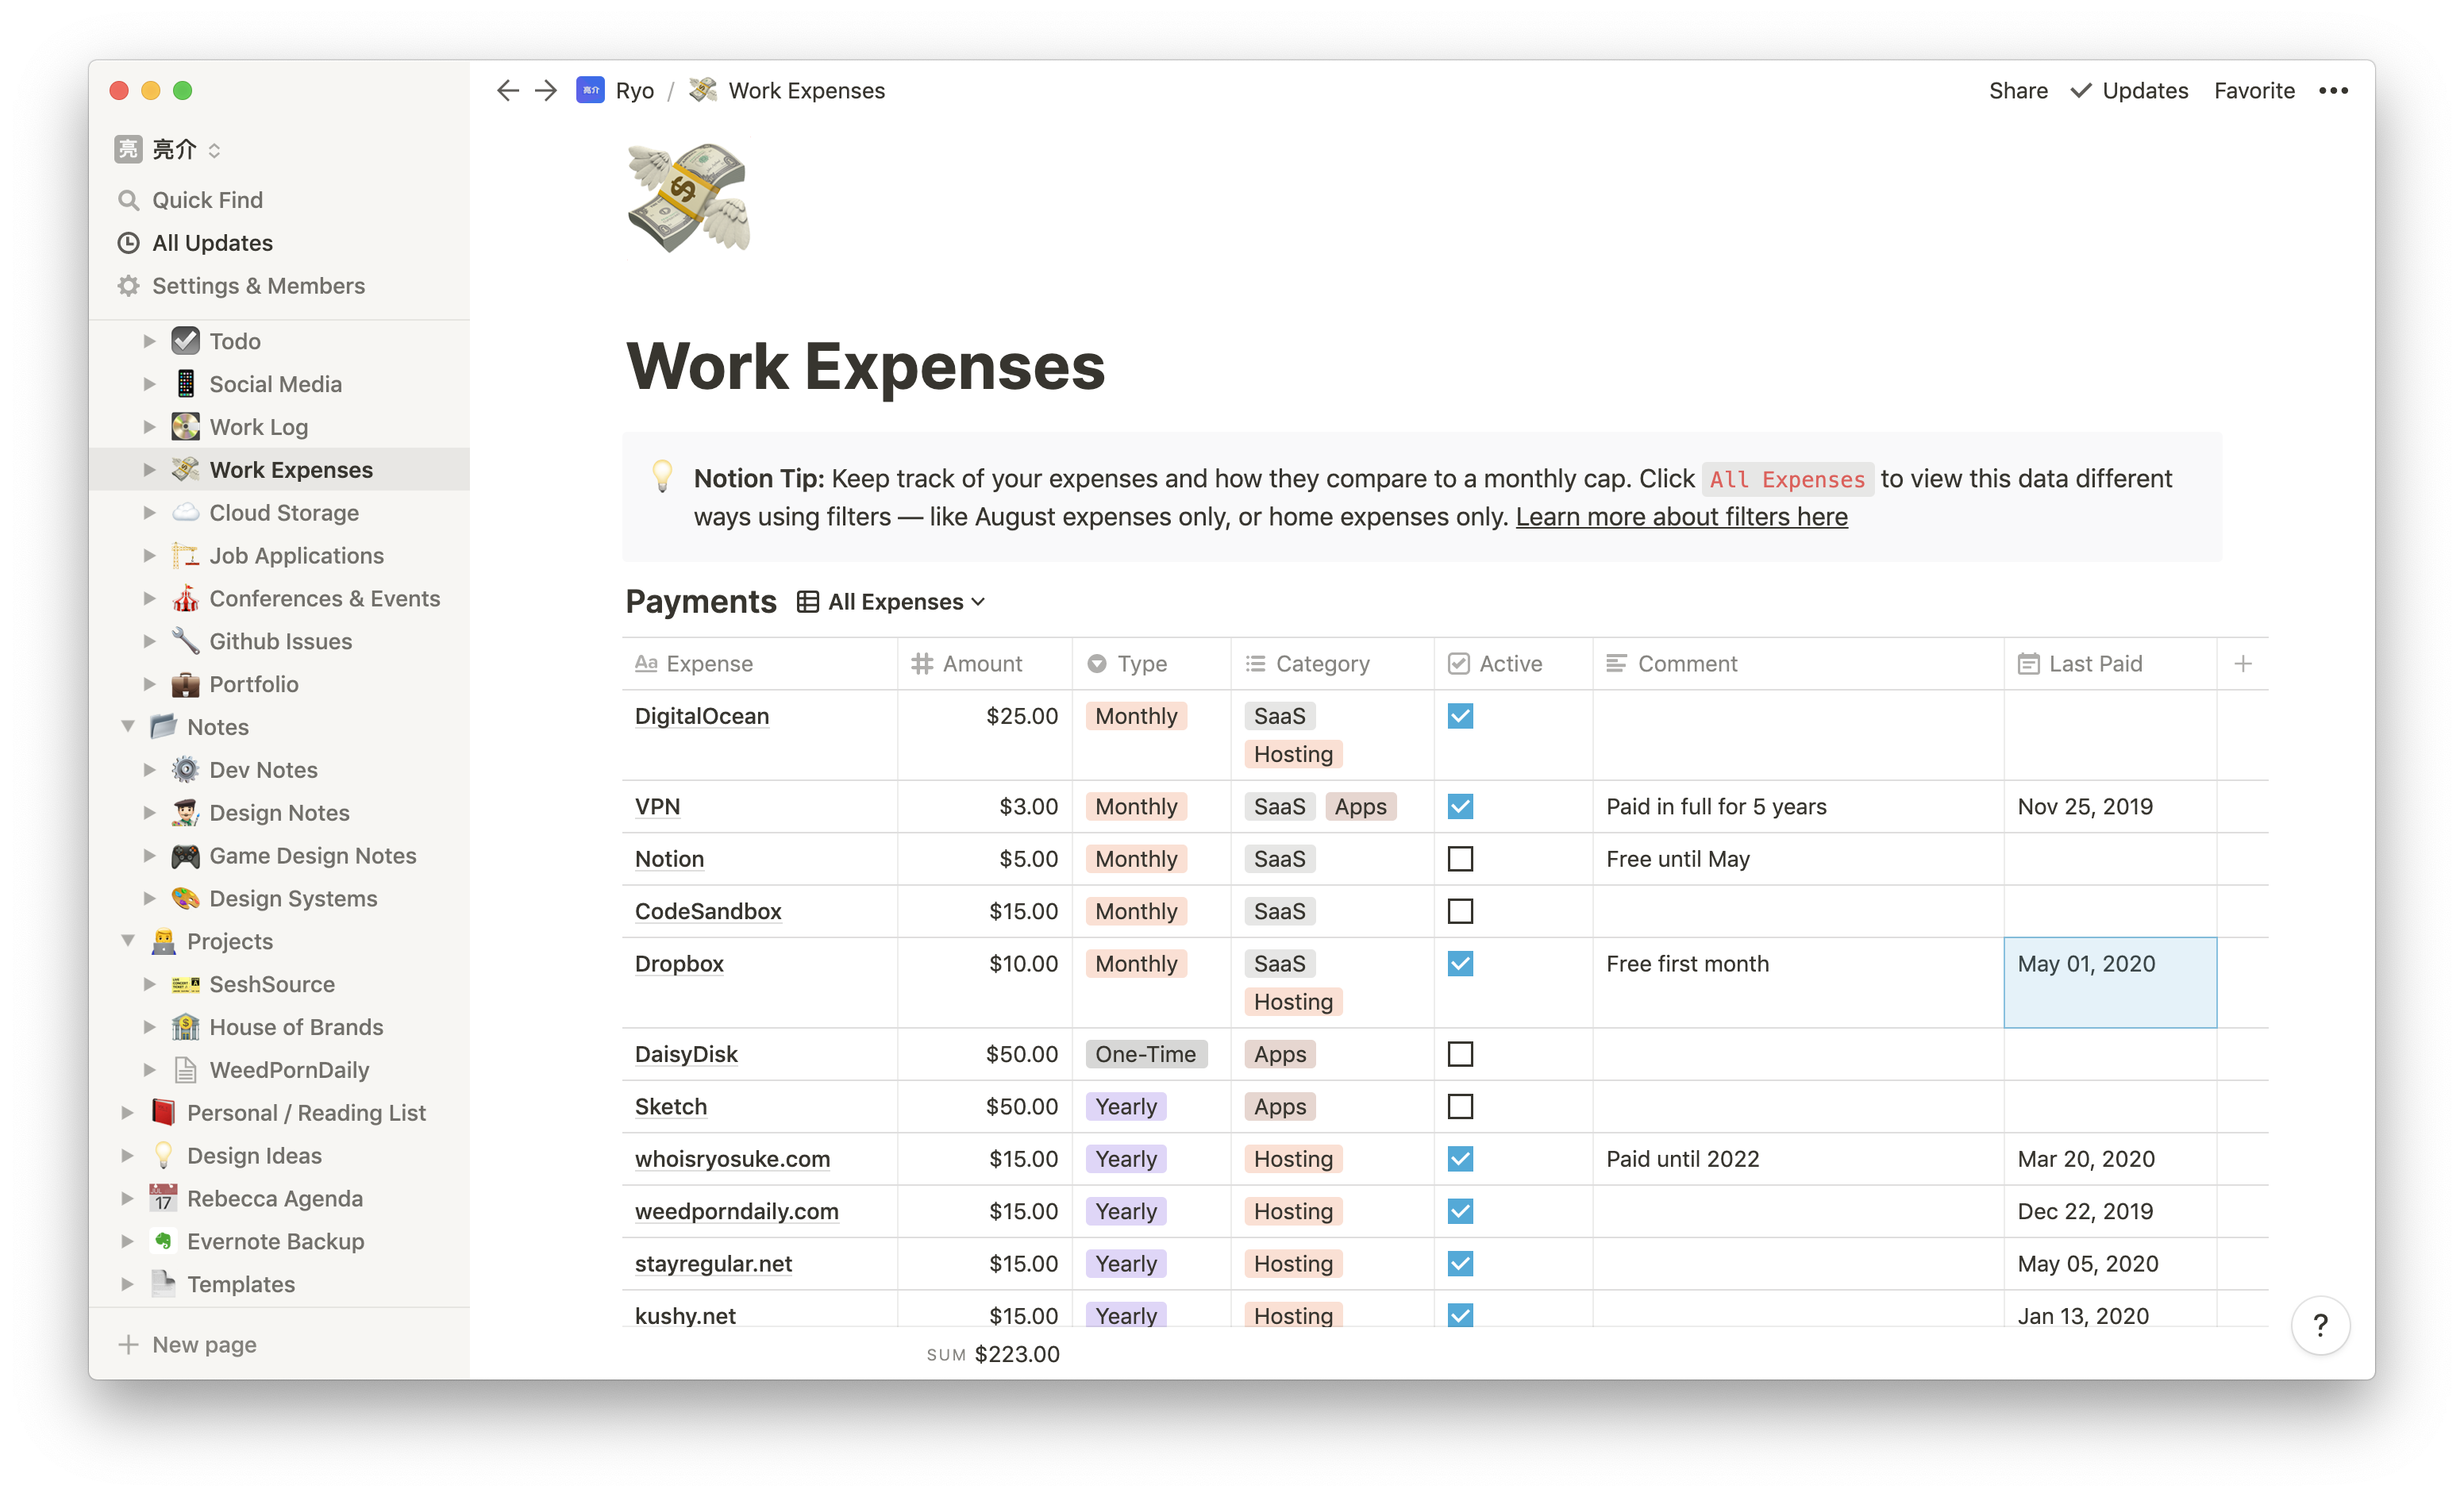 Screenshot of the Notion app on the Work Expenses page with a table view containing a list of expenses, their cost, when last paid, etc